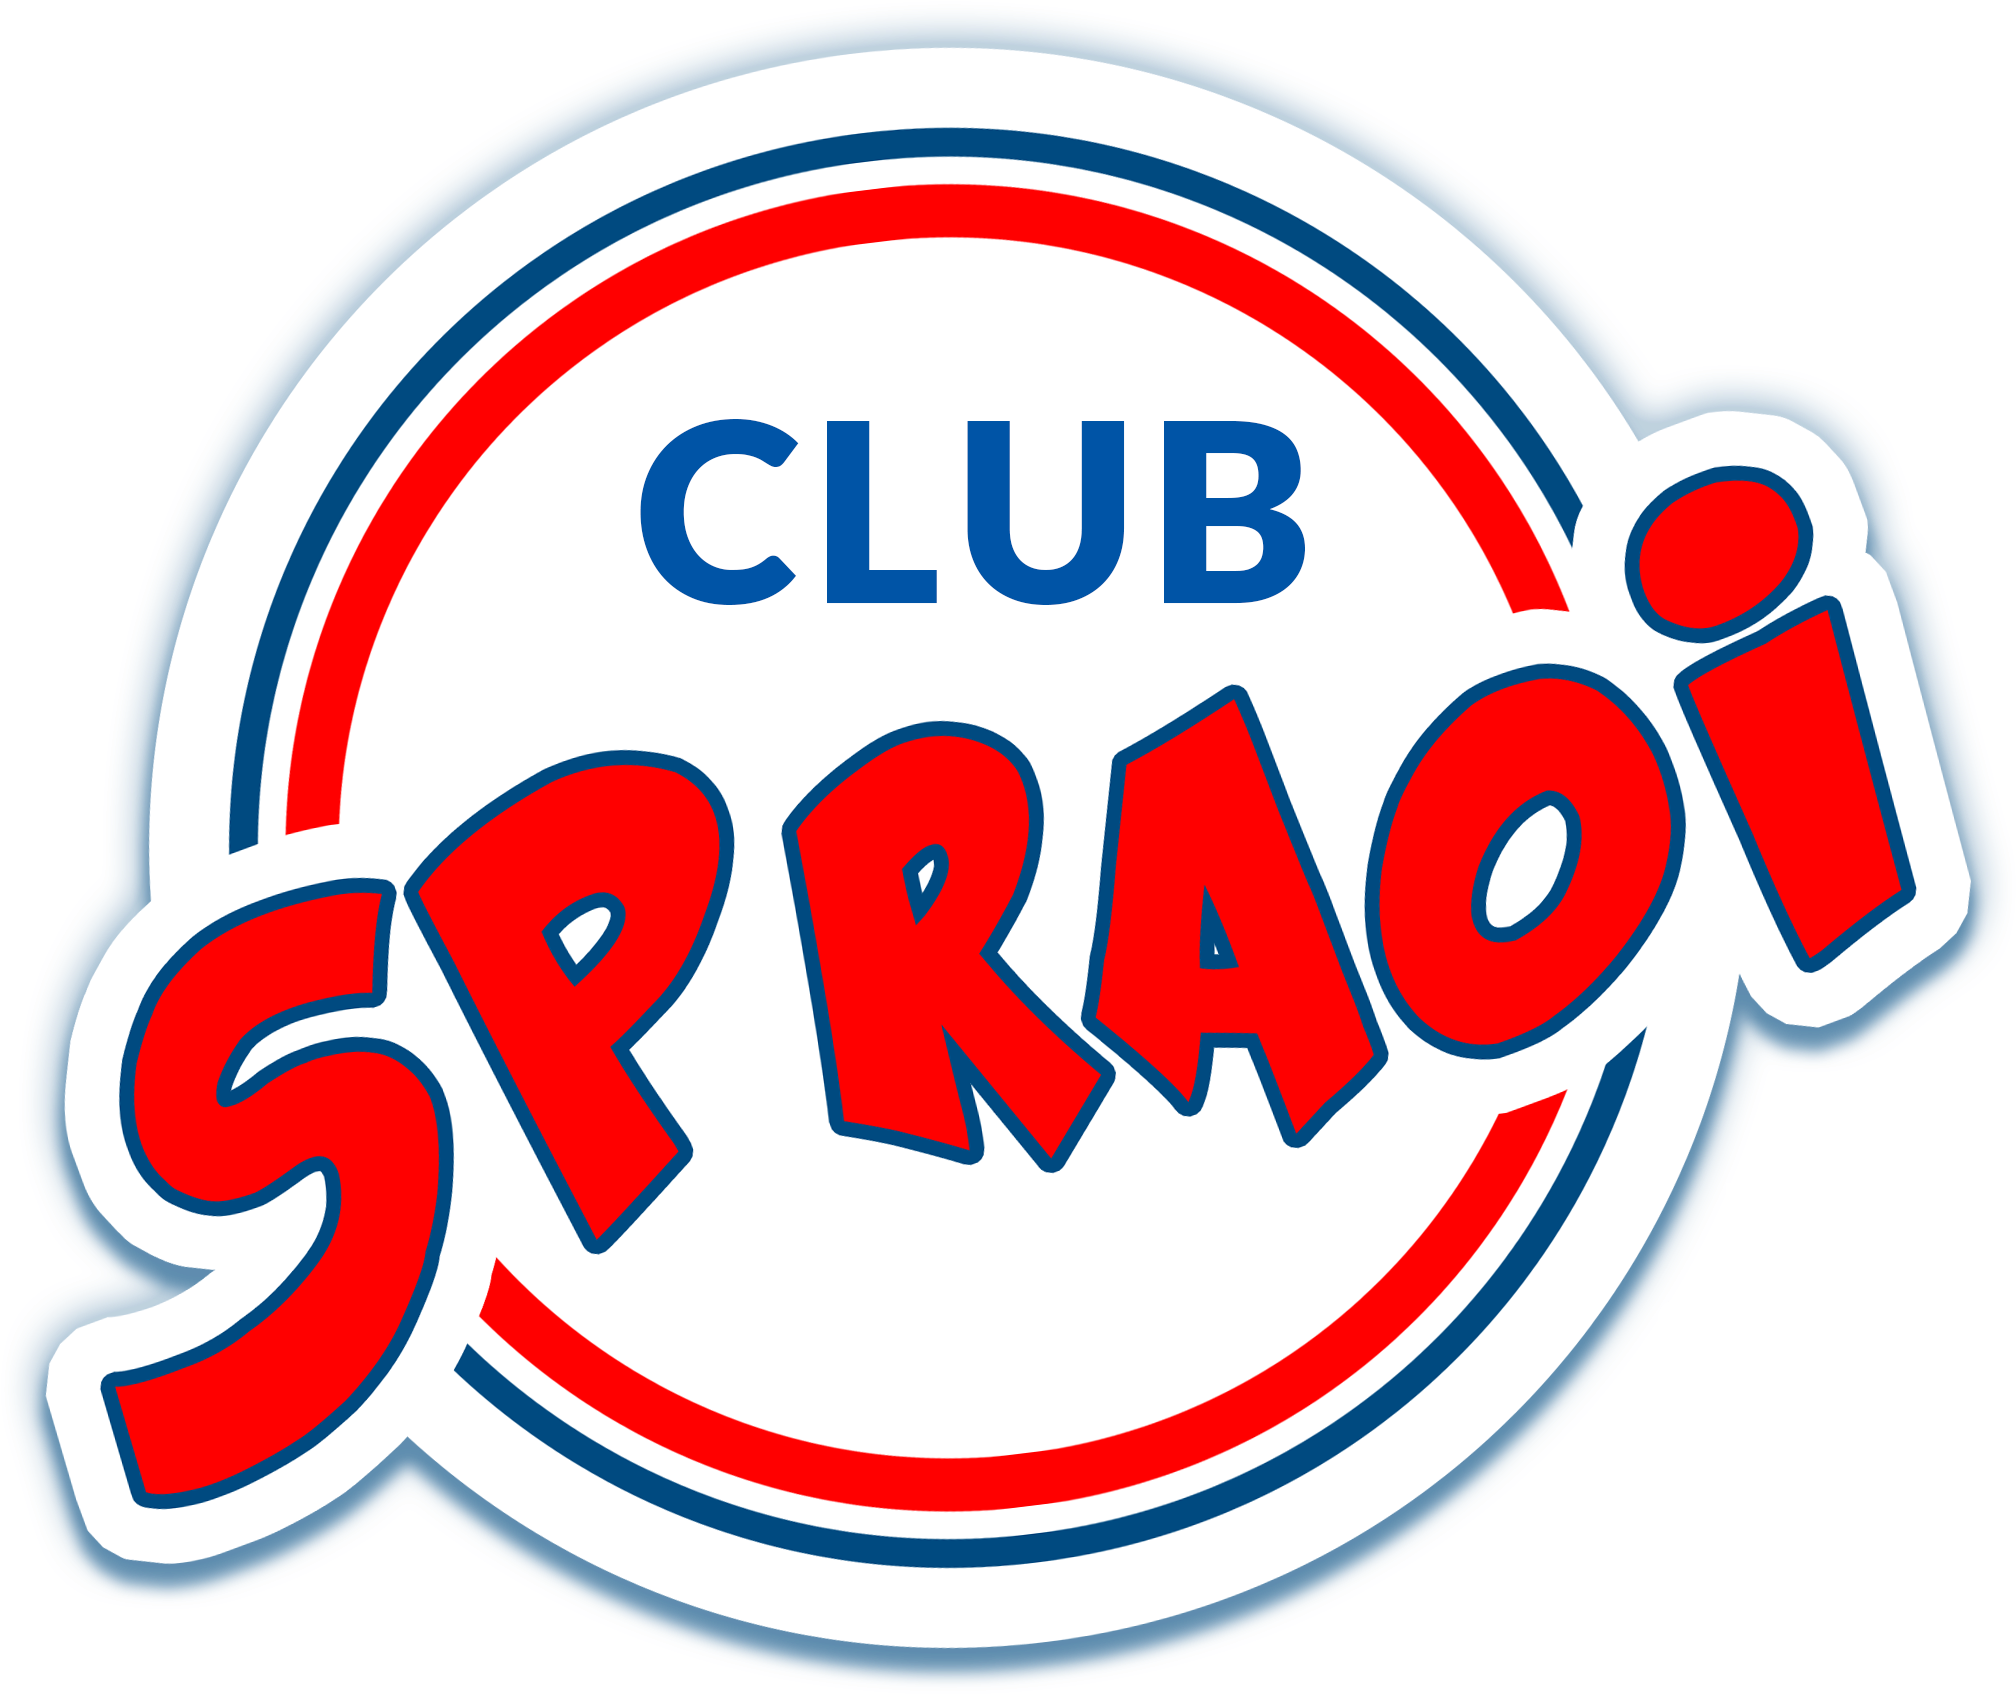 Announce That Club Spraoi Will Now Be Offering Childcare - Announce That Club Spraoi Will Now Be Offering Childcare (2100x1800)